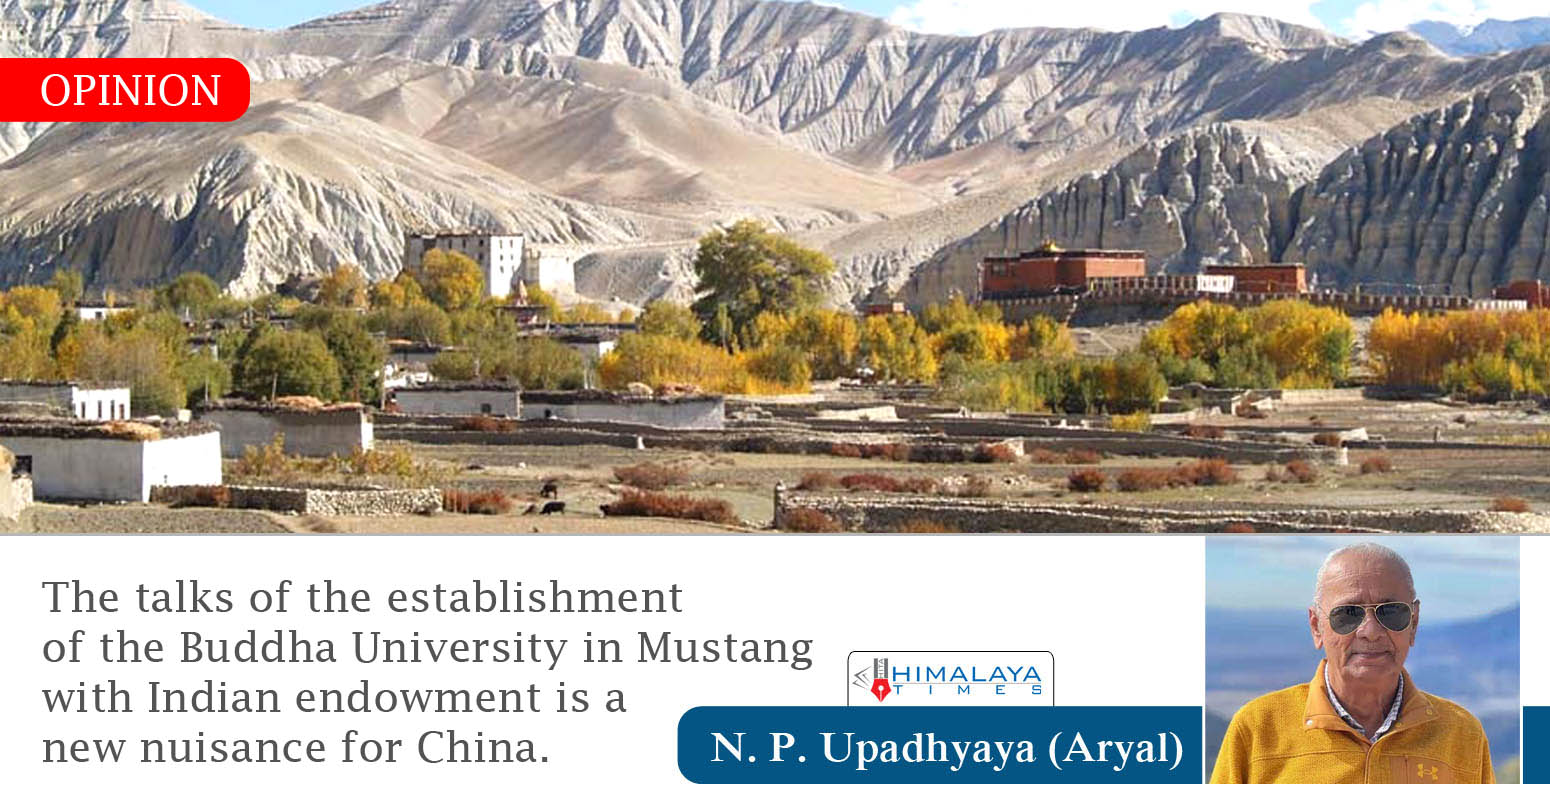 Proposed Buddha University in Mustang: How China could retaliate?